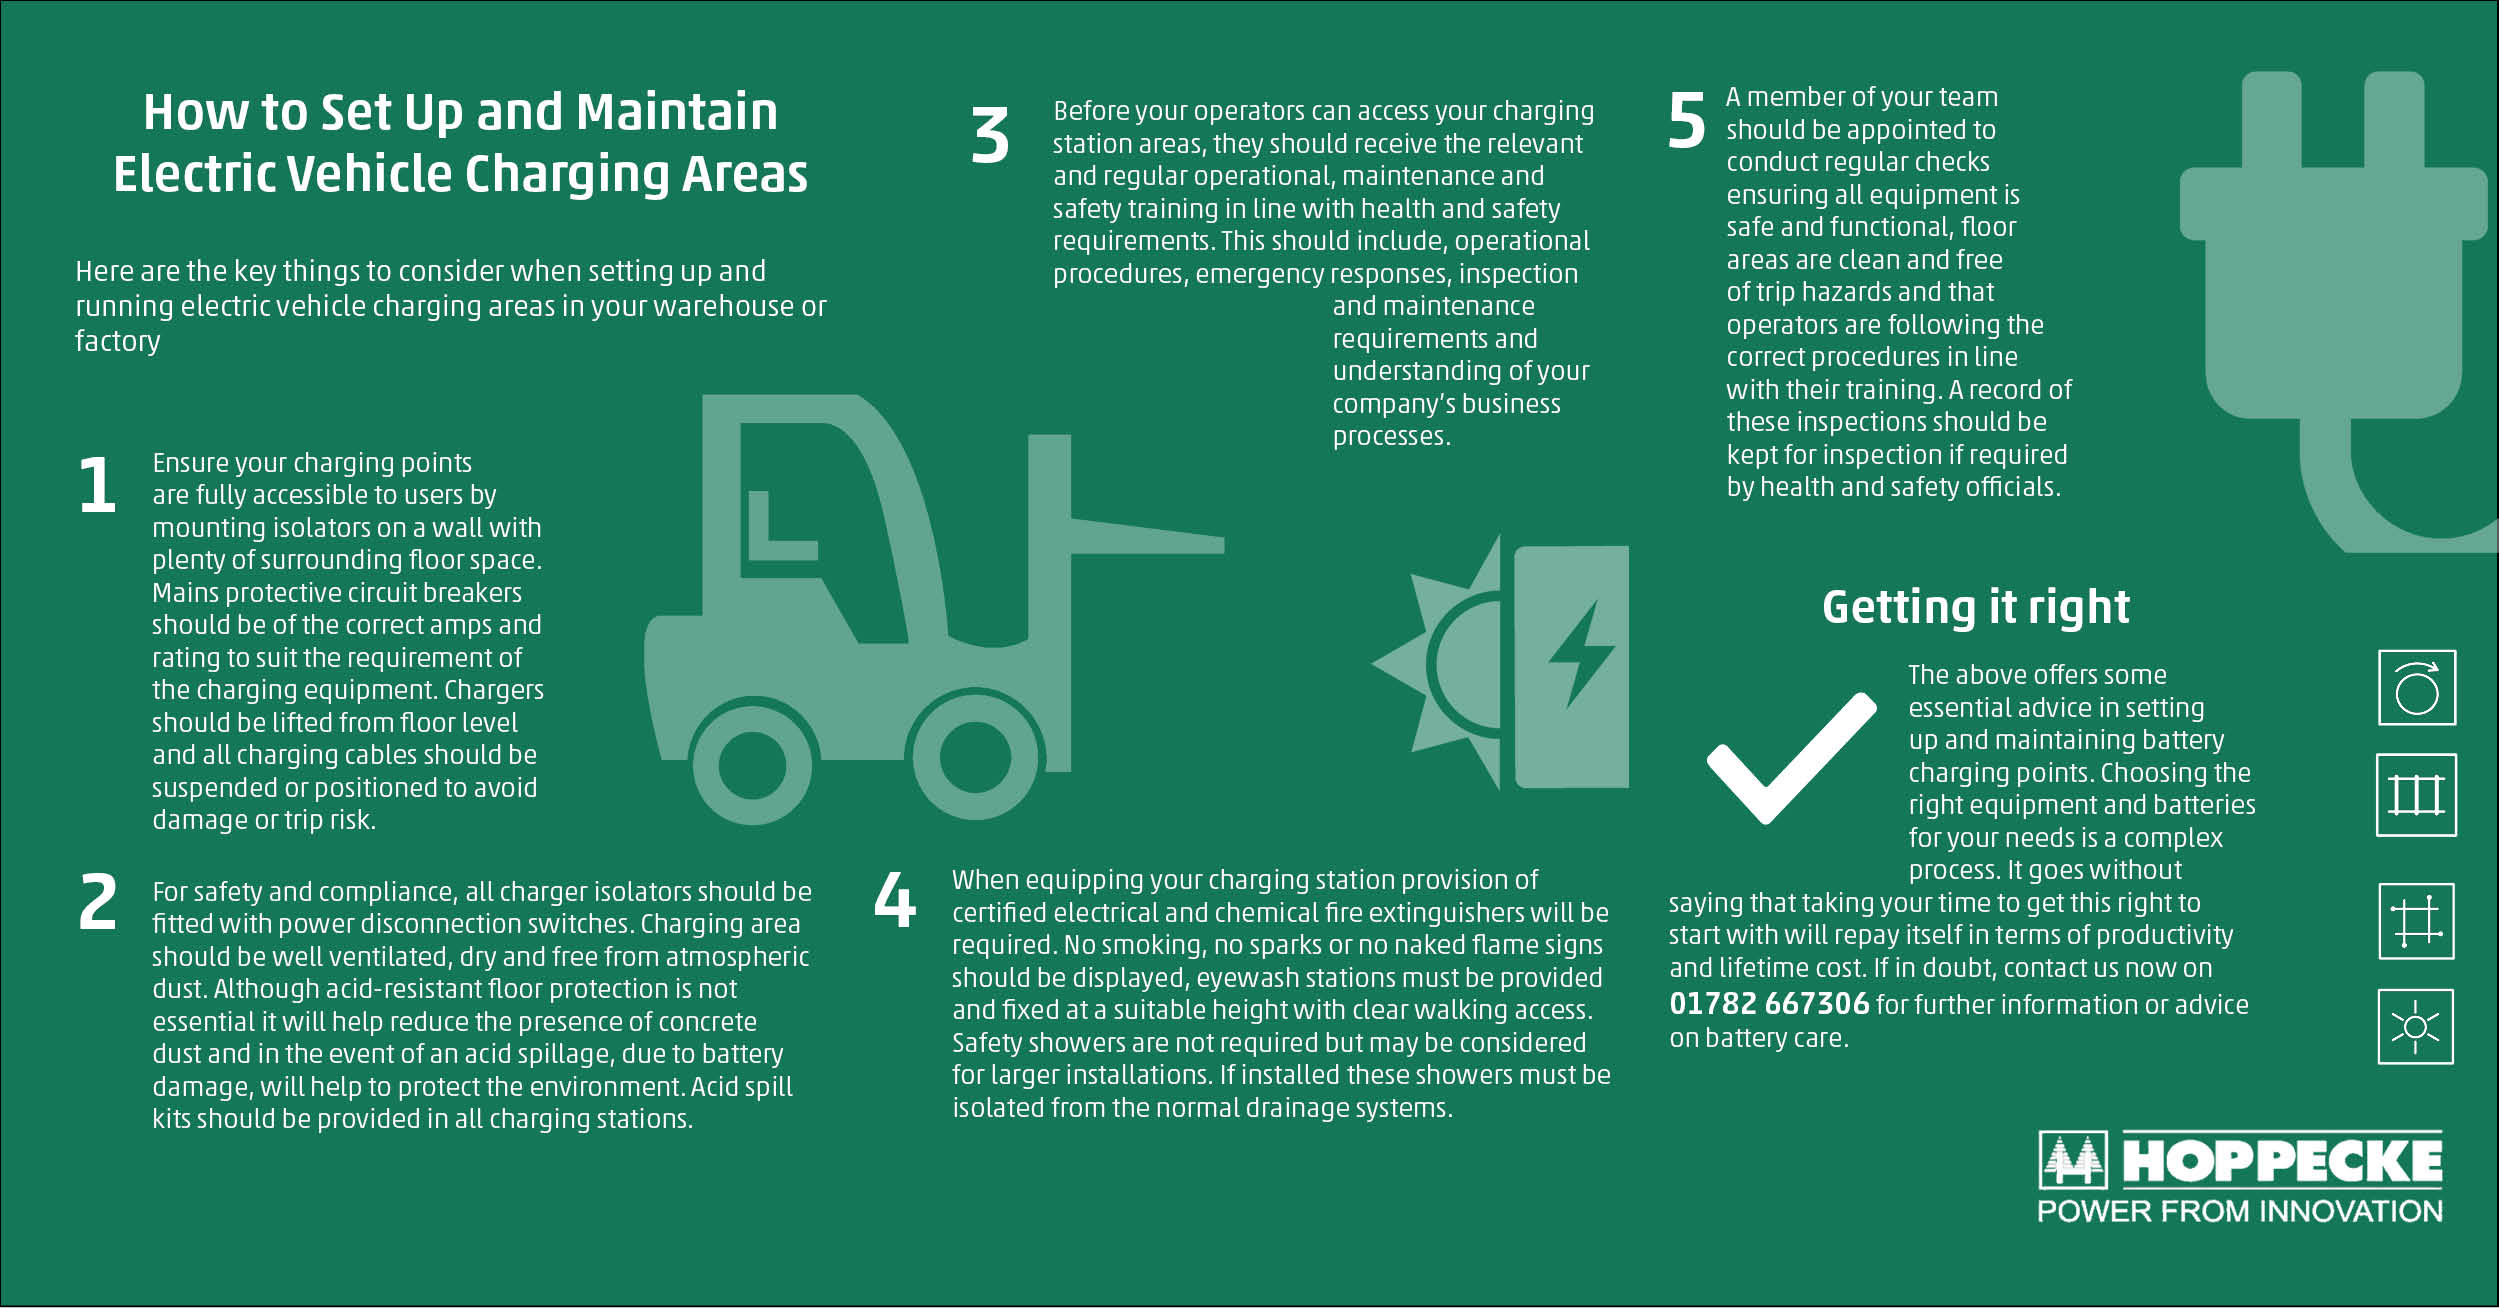 How to Set Up and Maintain Electric Vehicle Charging Areas - Tuesday, 09.06.2020